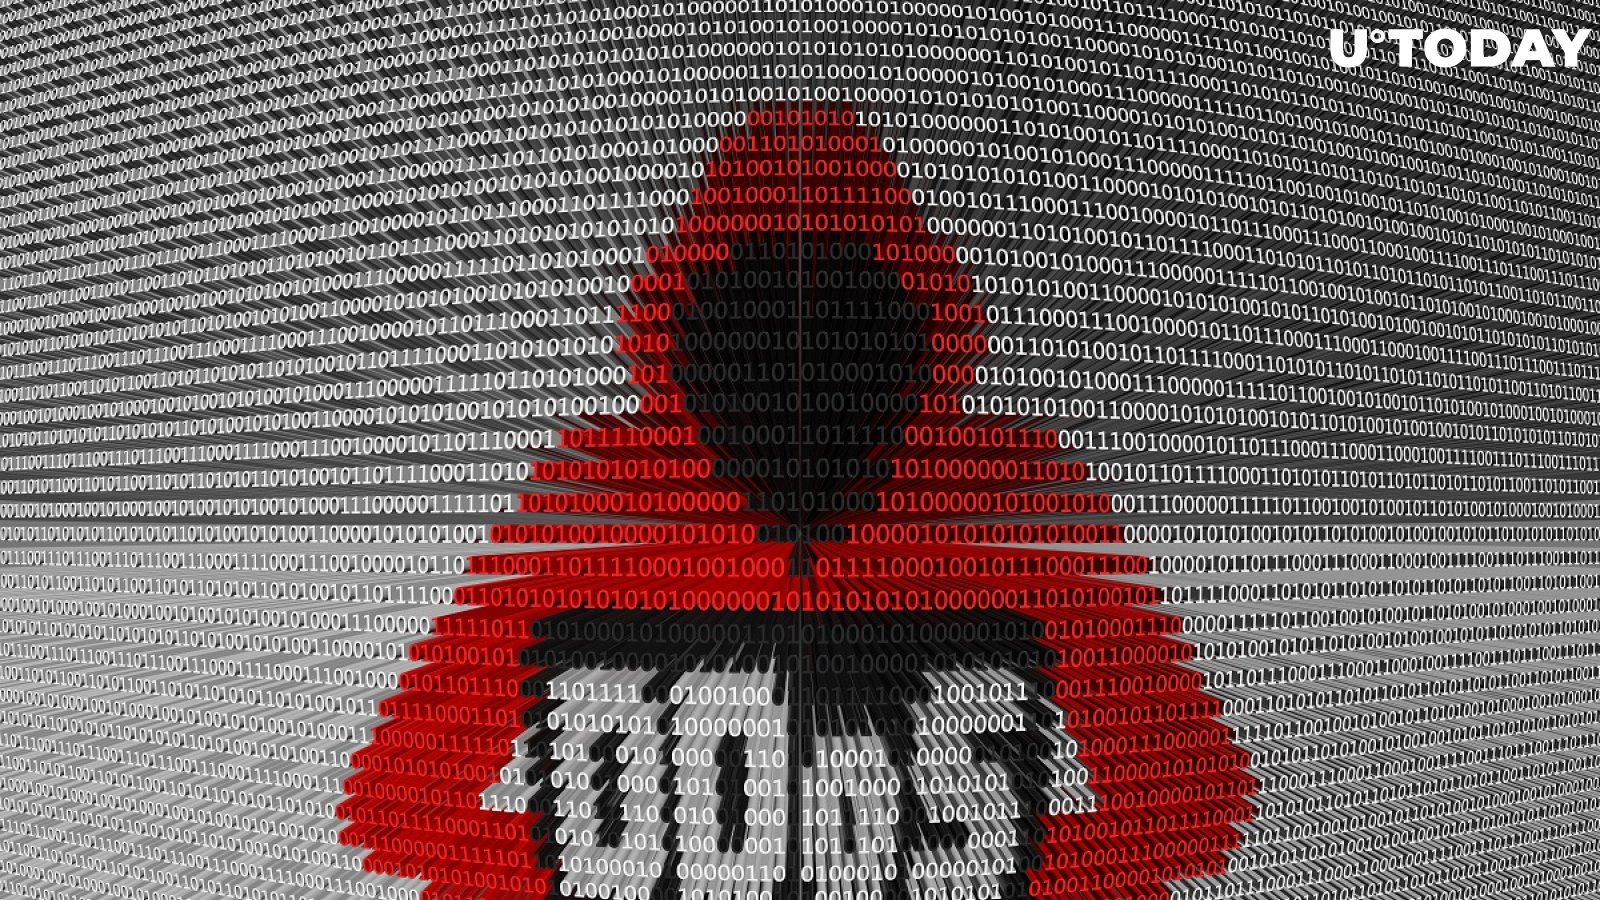 Bitcoin.org Hit with “Absolutely Massive” DDoS Attack